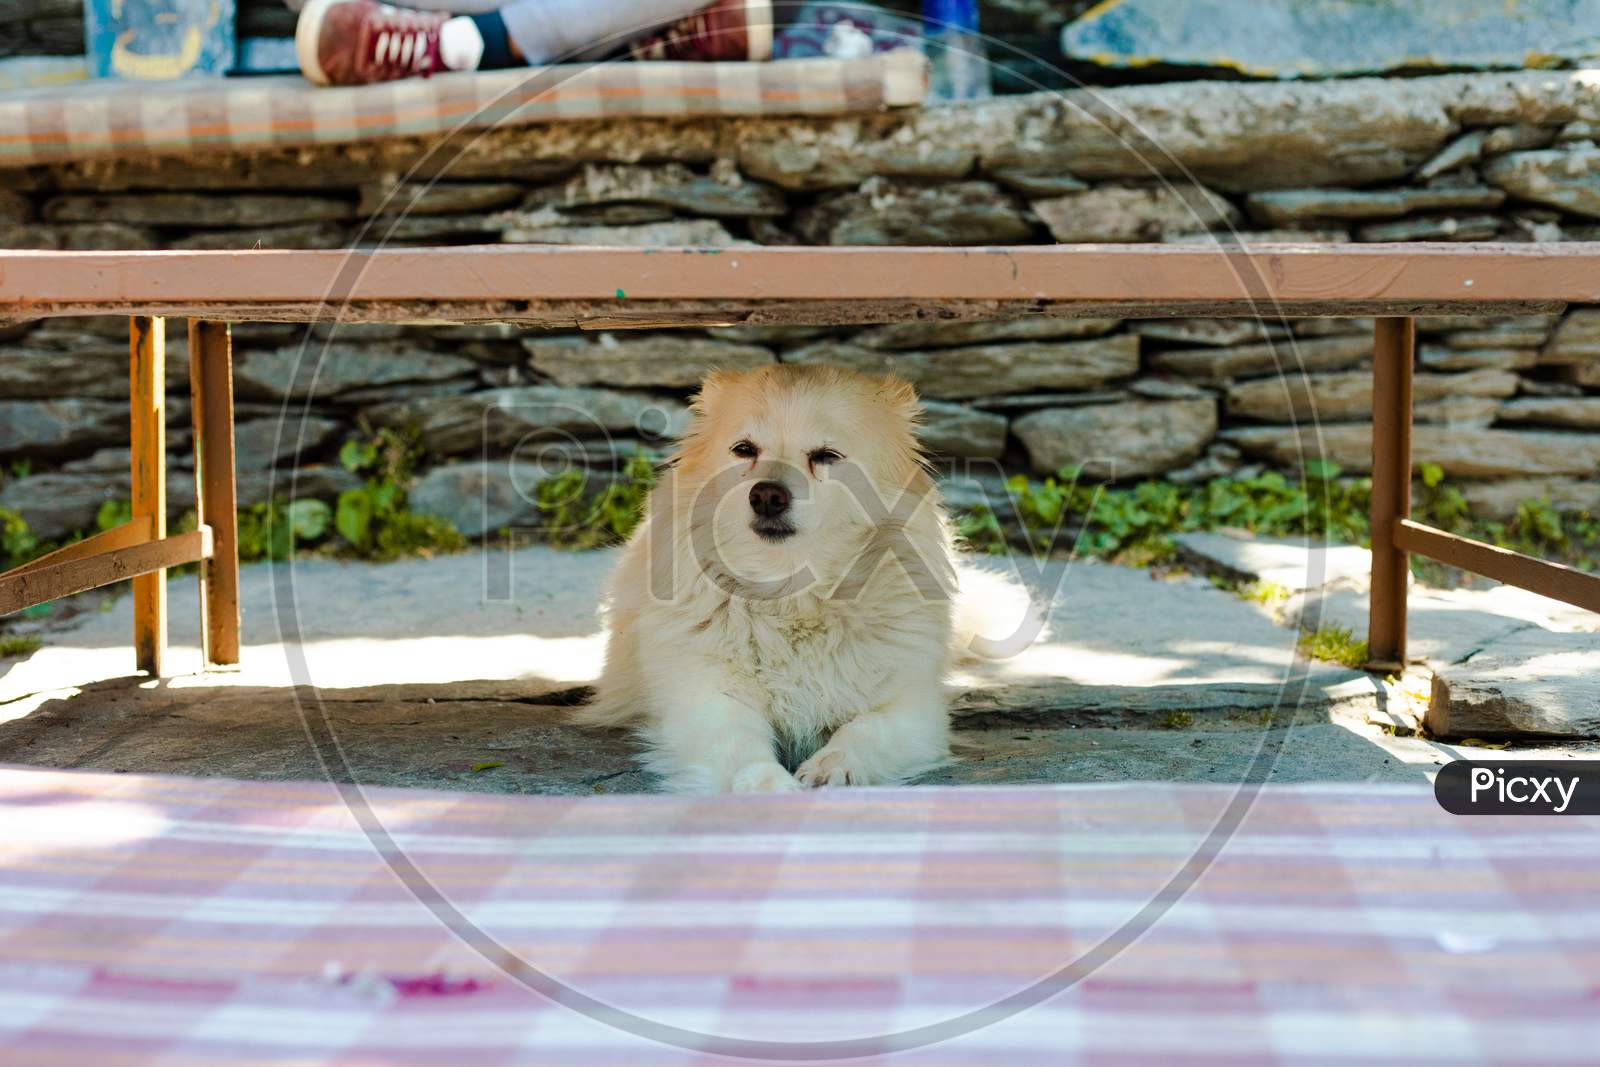 A Cute Dog under the table looking at the strangers